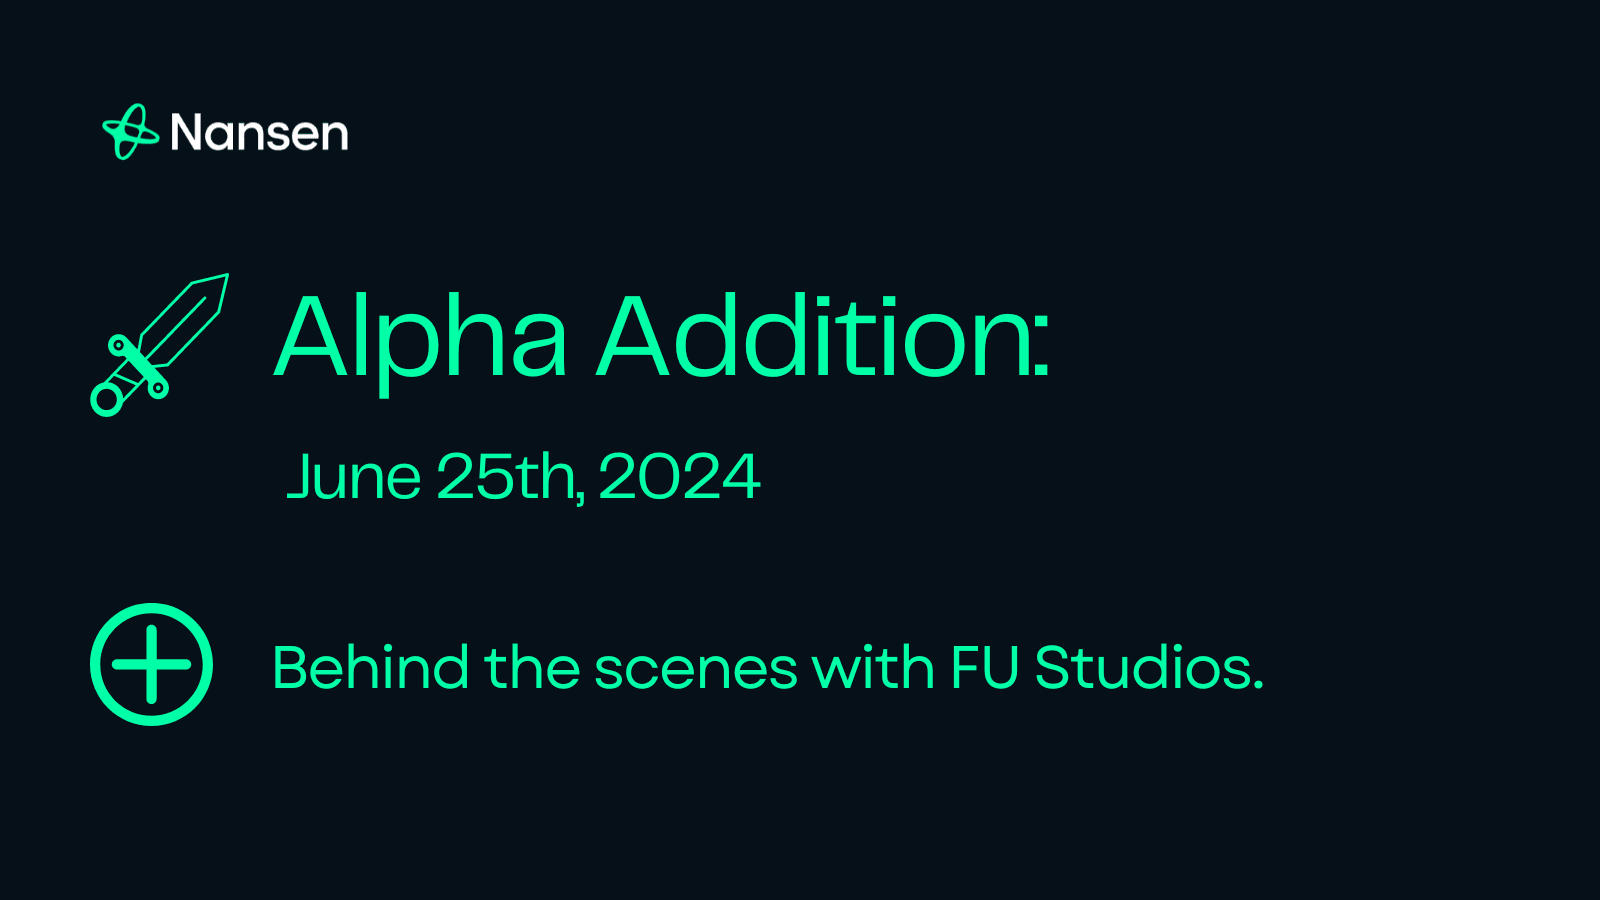 Alpha Addition: Behind the Scenes With FU Studios | June 25th, 2024